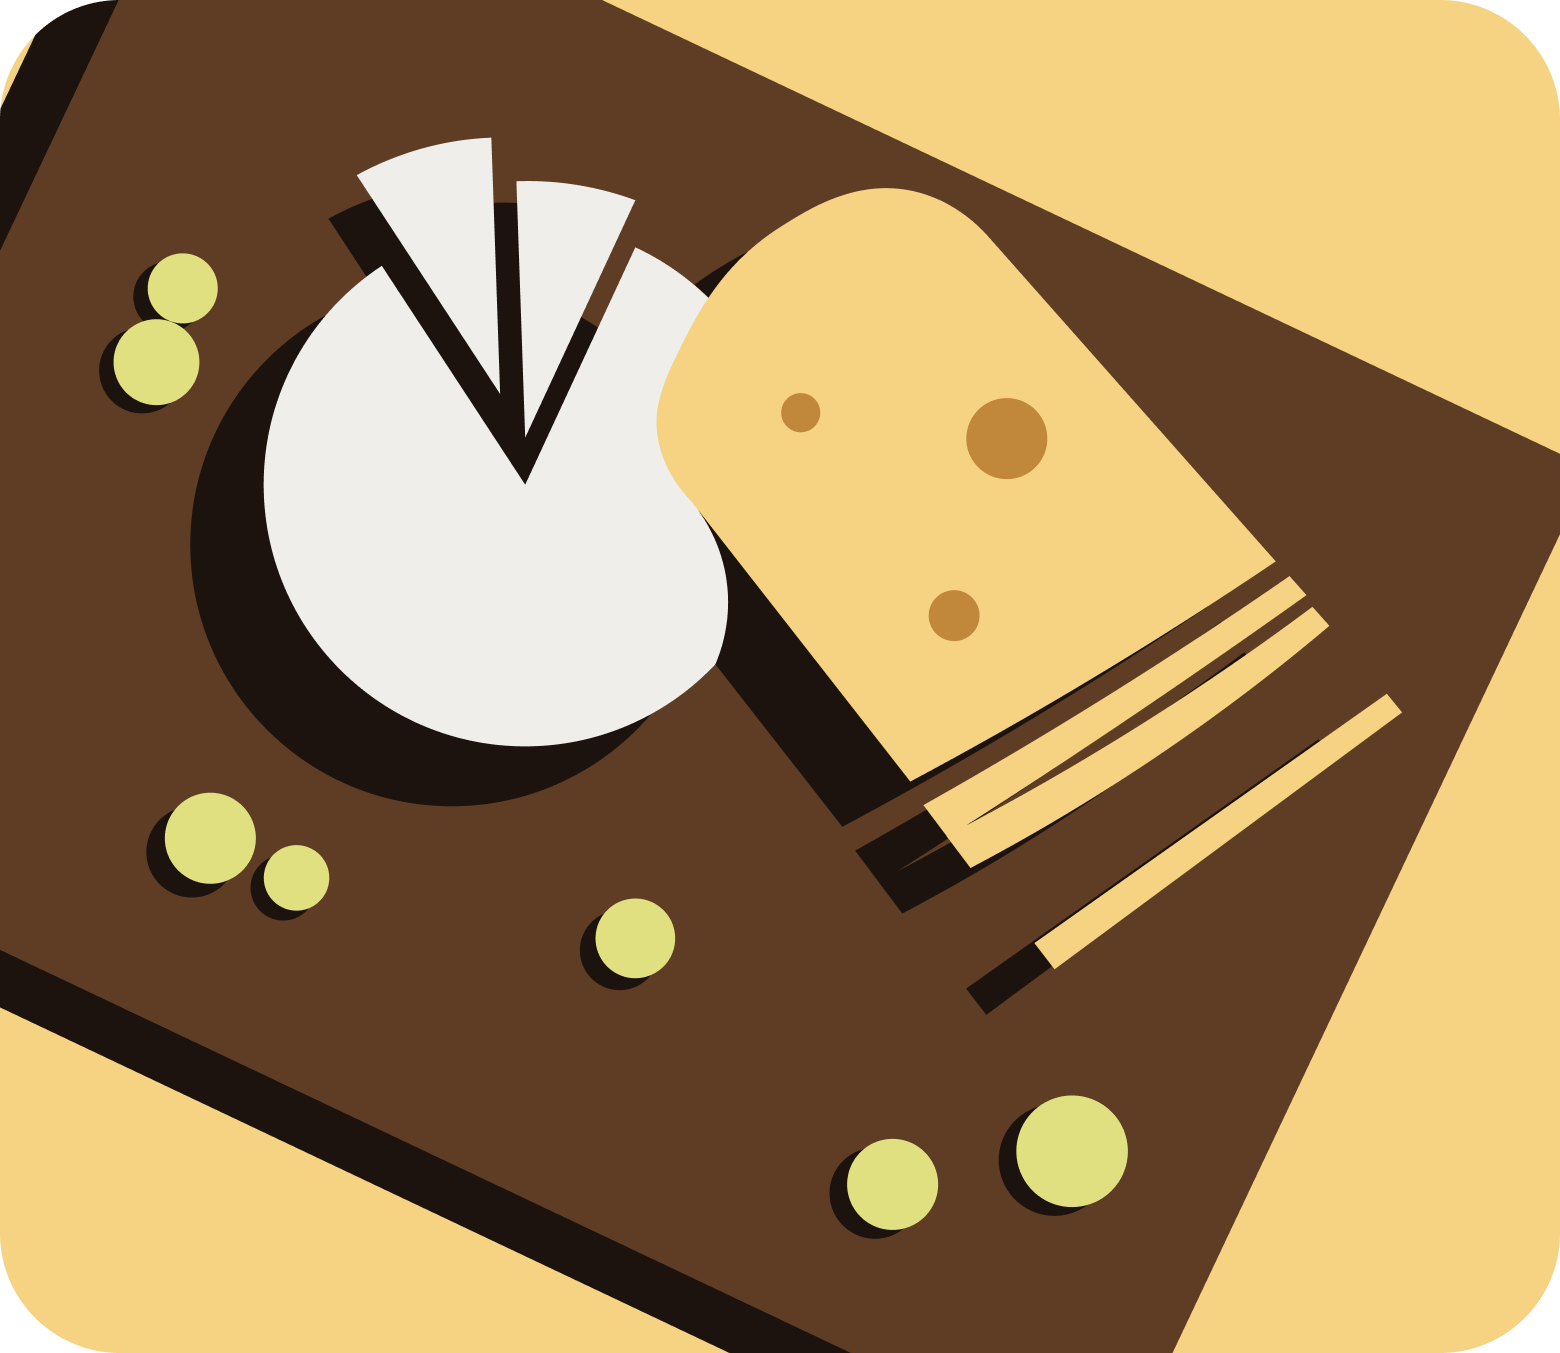 a cheese and bread icon on a brown background.